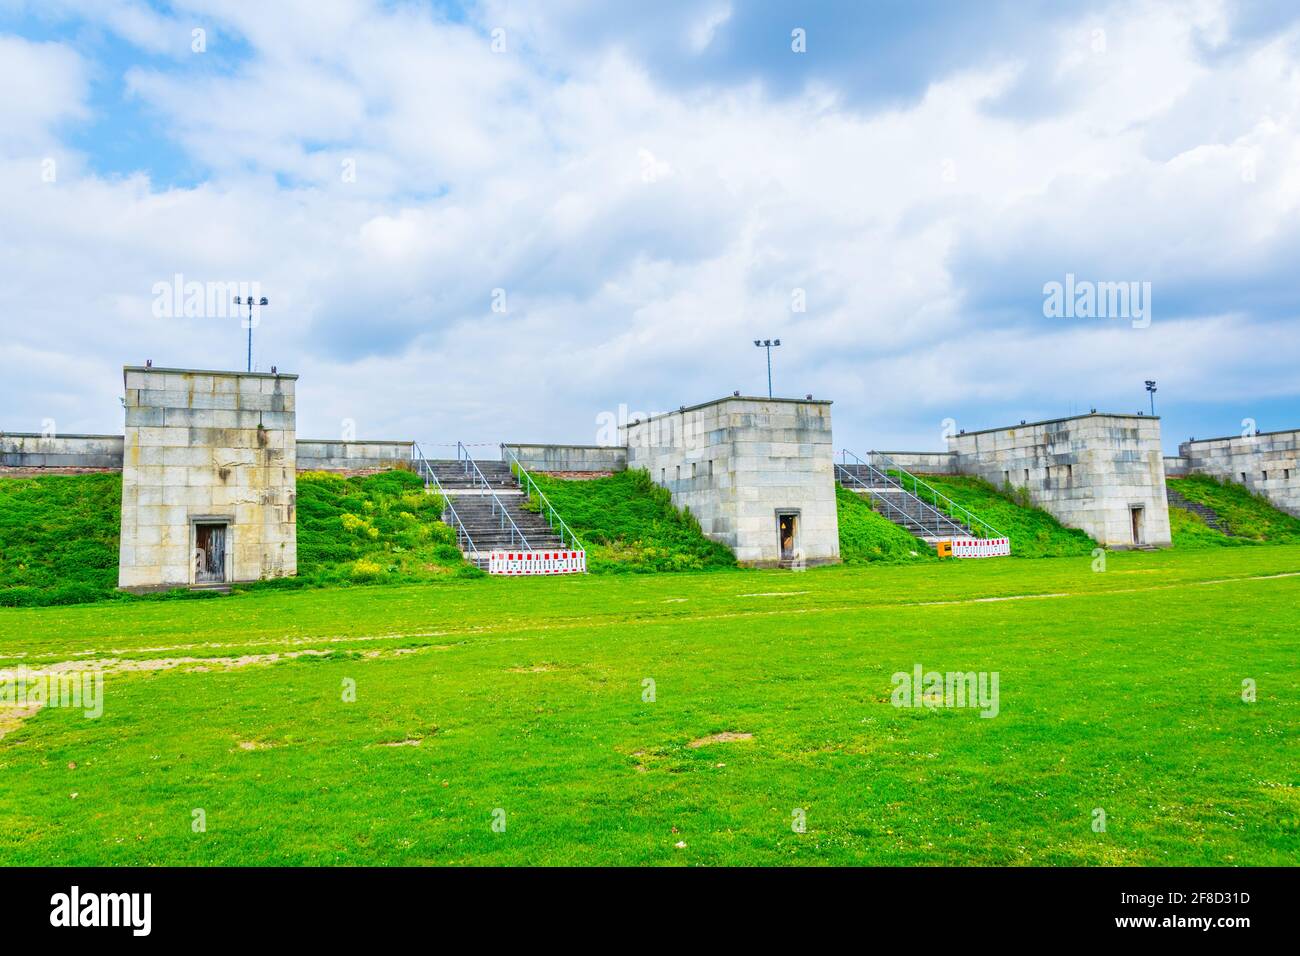 View of ruins of nazi sport stadium within the nsdap rally grounds in Nurnberg, Germany Stock Photo